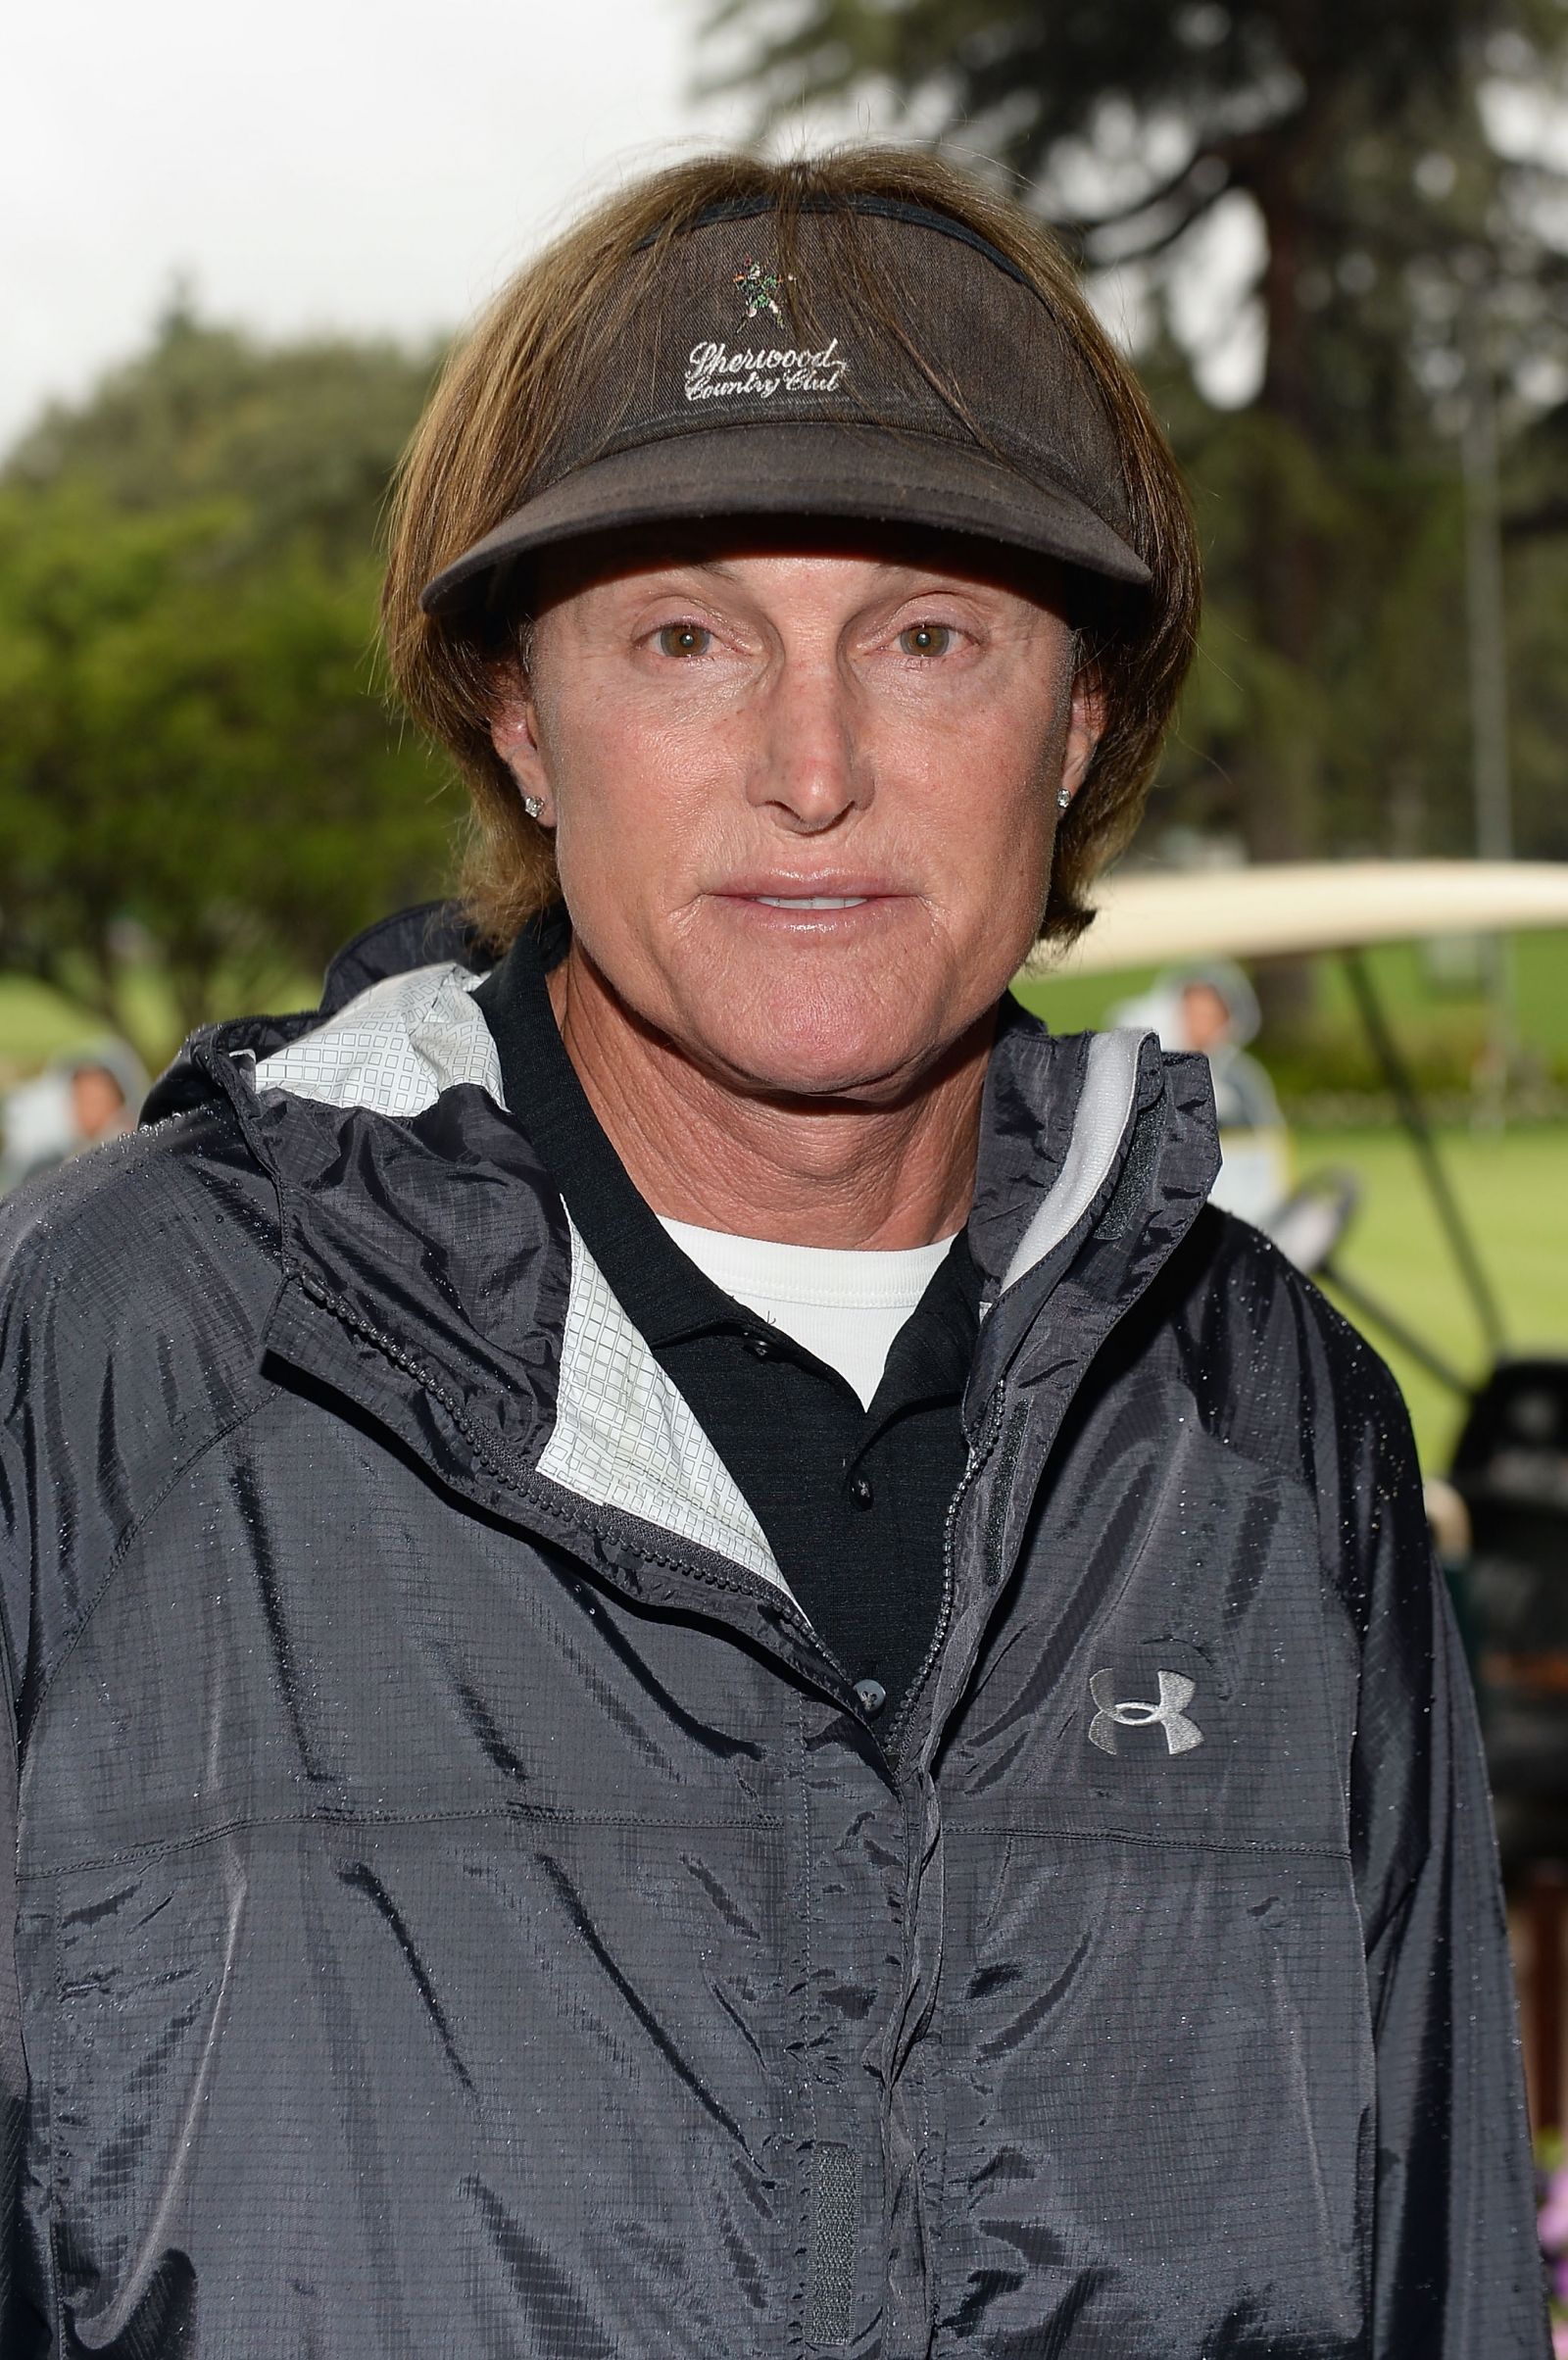 Bruce Jenner TV special He has buckled to the pressure and it saddens me